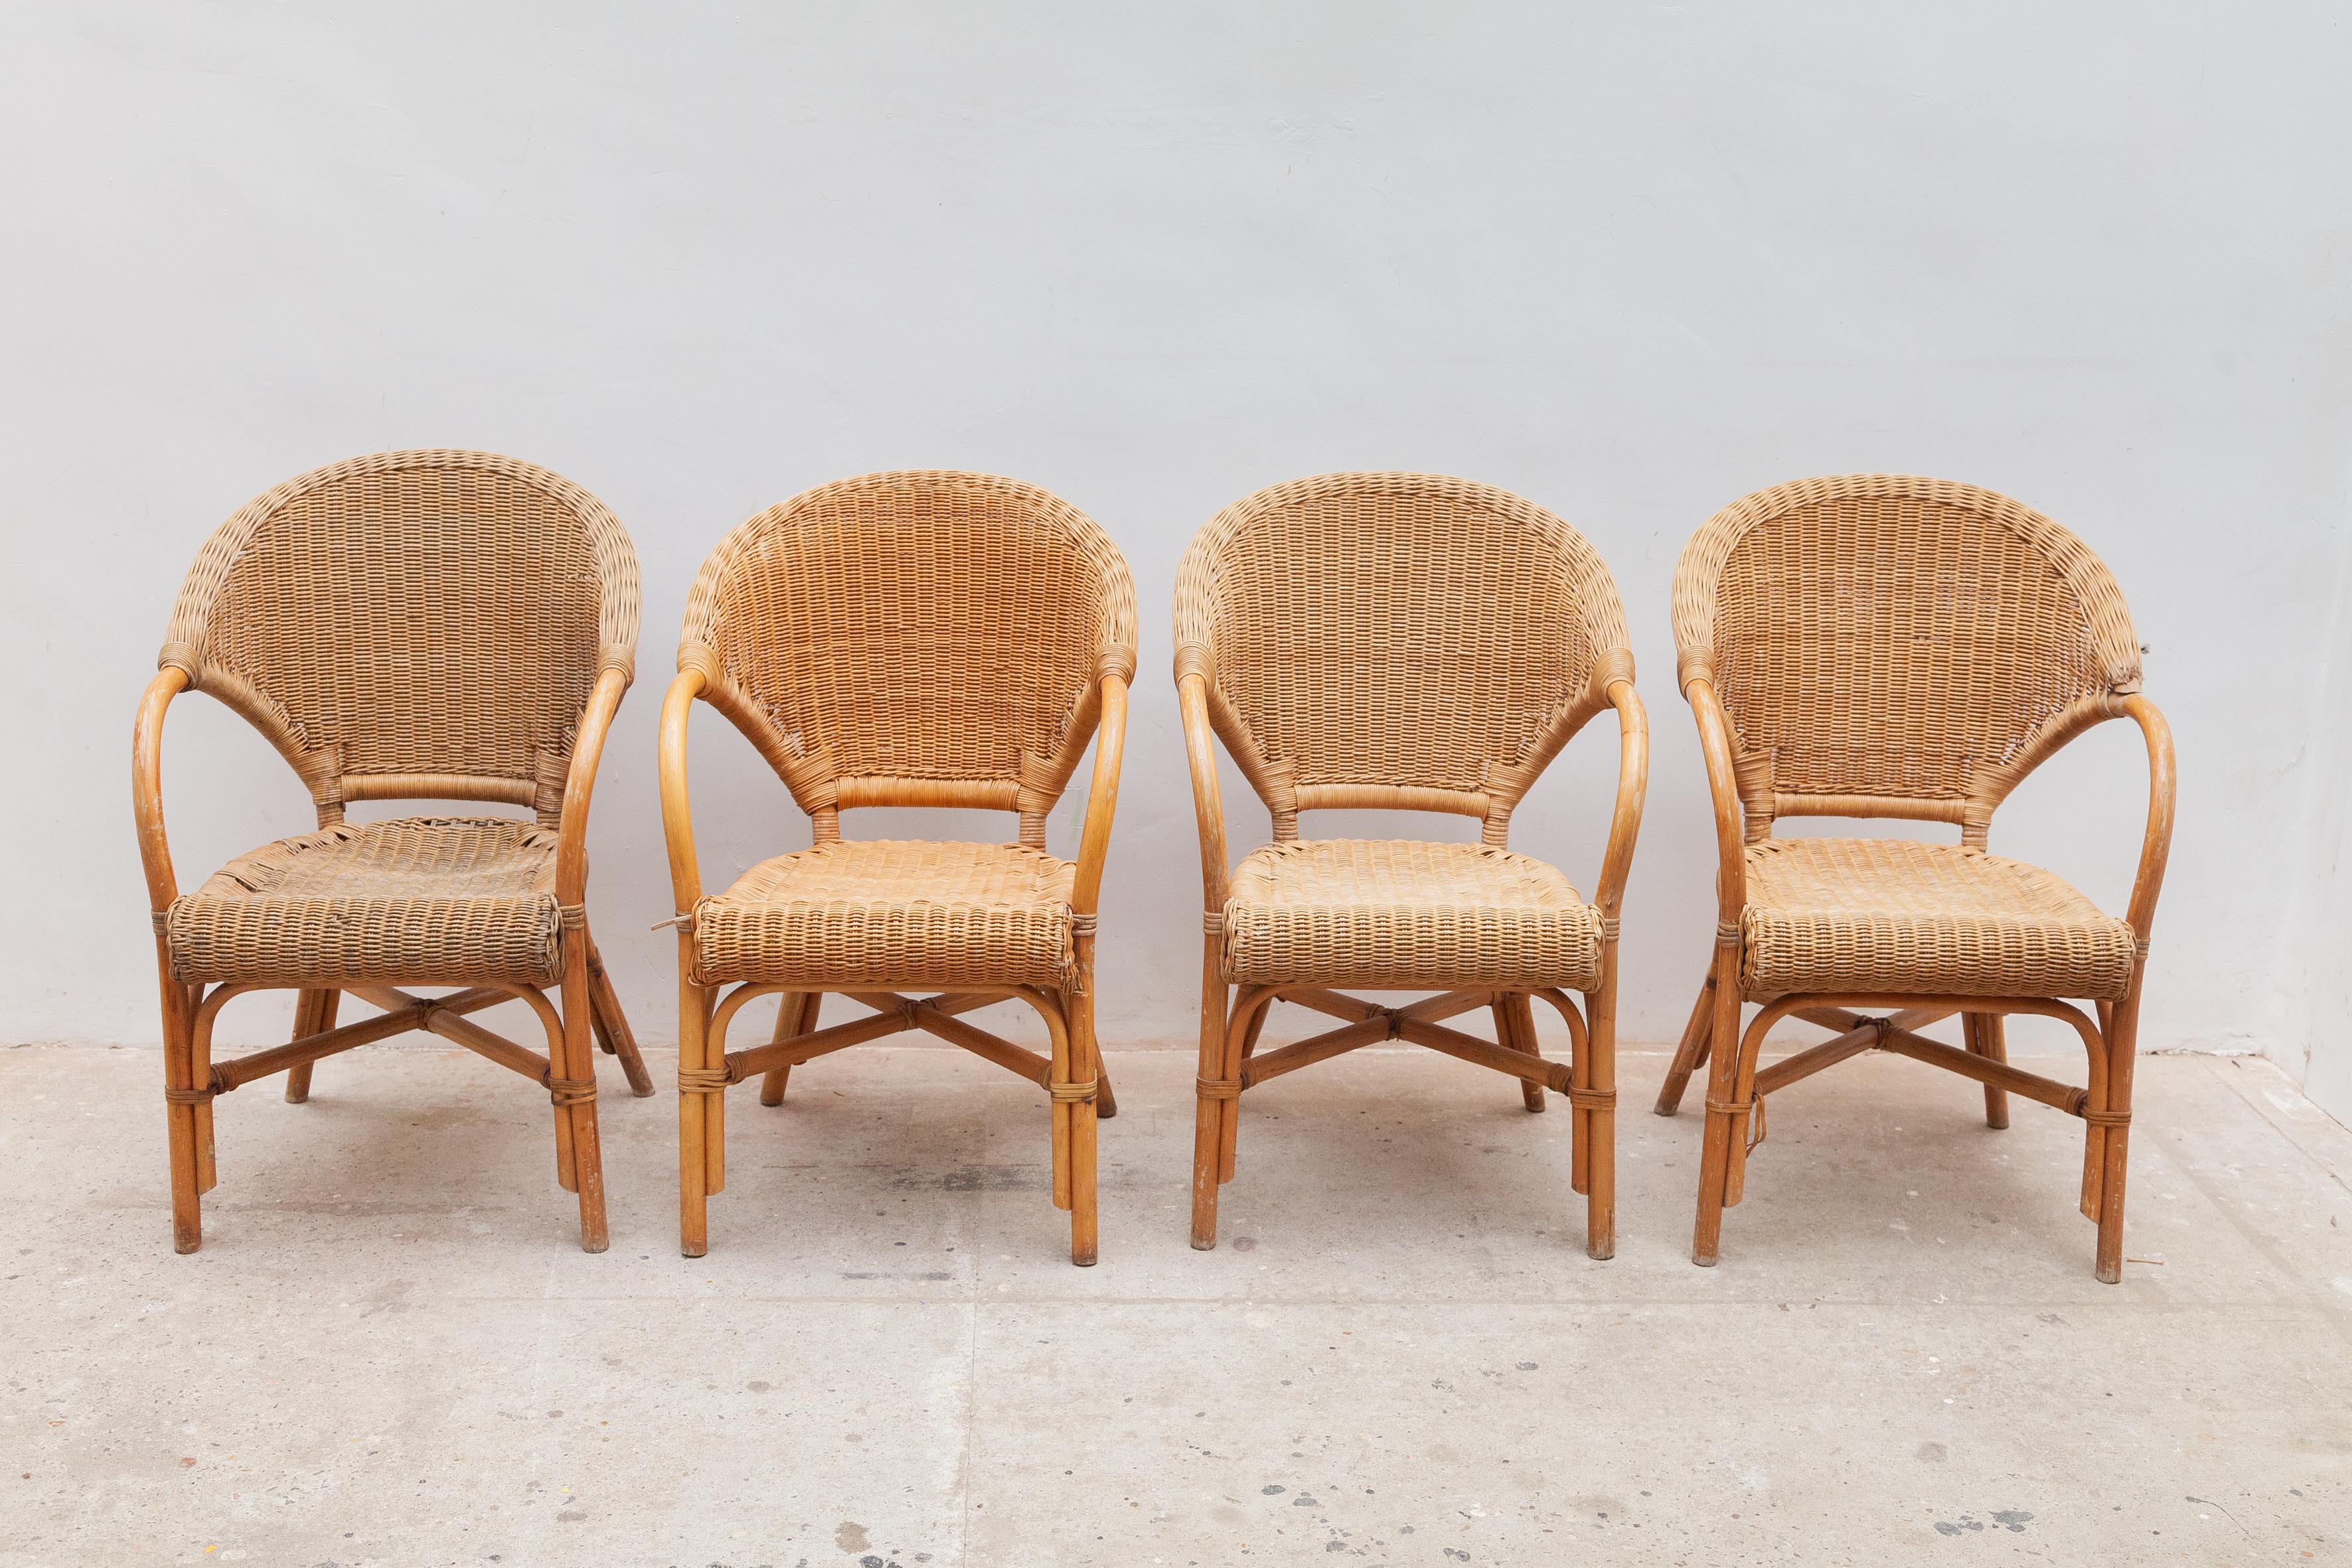 1970s Italian set of four armchairs in rattan wicker and bamboo. This charming lounge chairs are in the typical Riviera style where the organic beauty of the woven materials is timeless and Classic. These chairs feature a lightweight bamboo frame